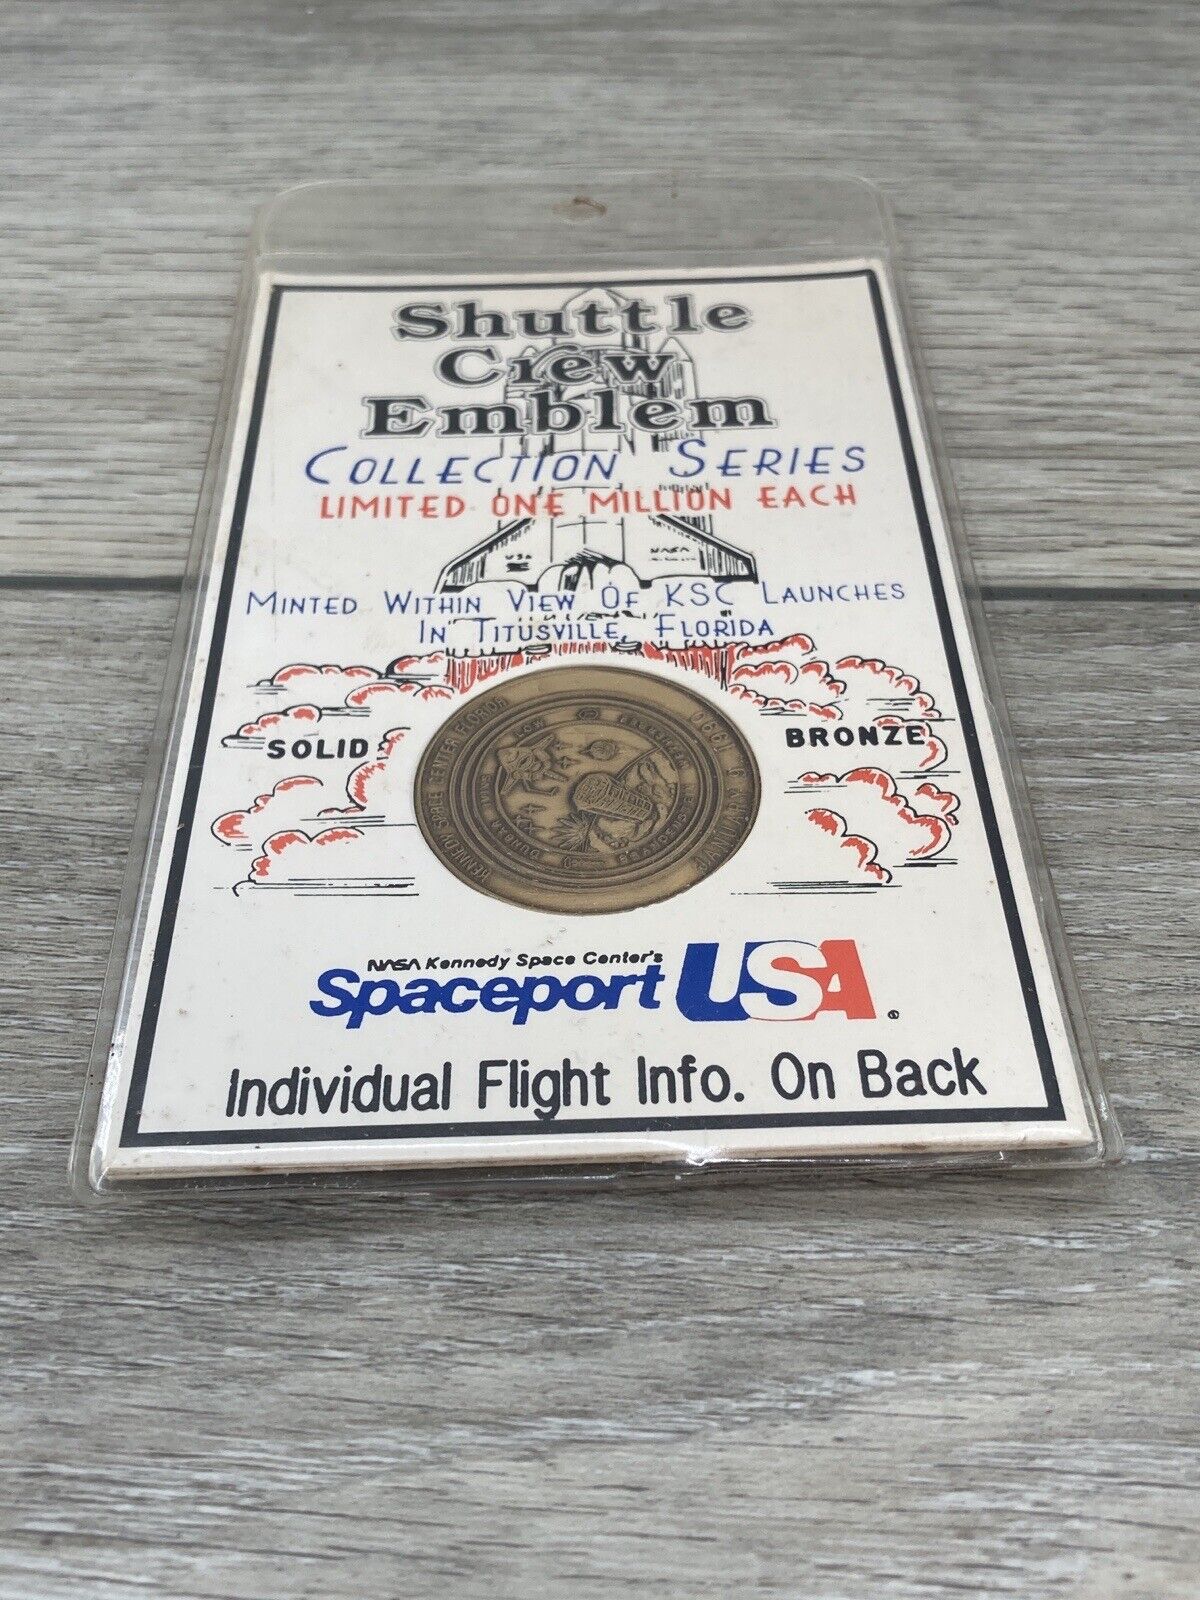 Nasa Kennedy Space Center Shuttle Crew Emblem Collectible Coin Solid Bronze 1990